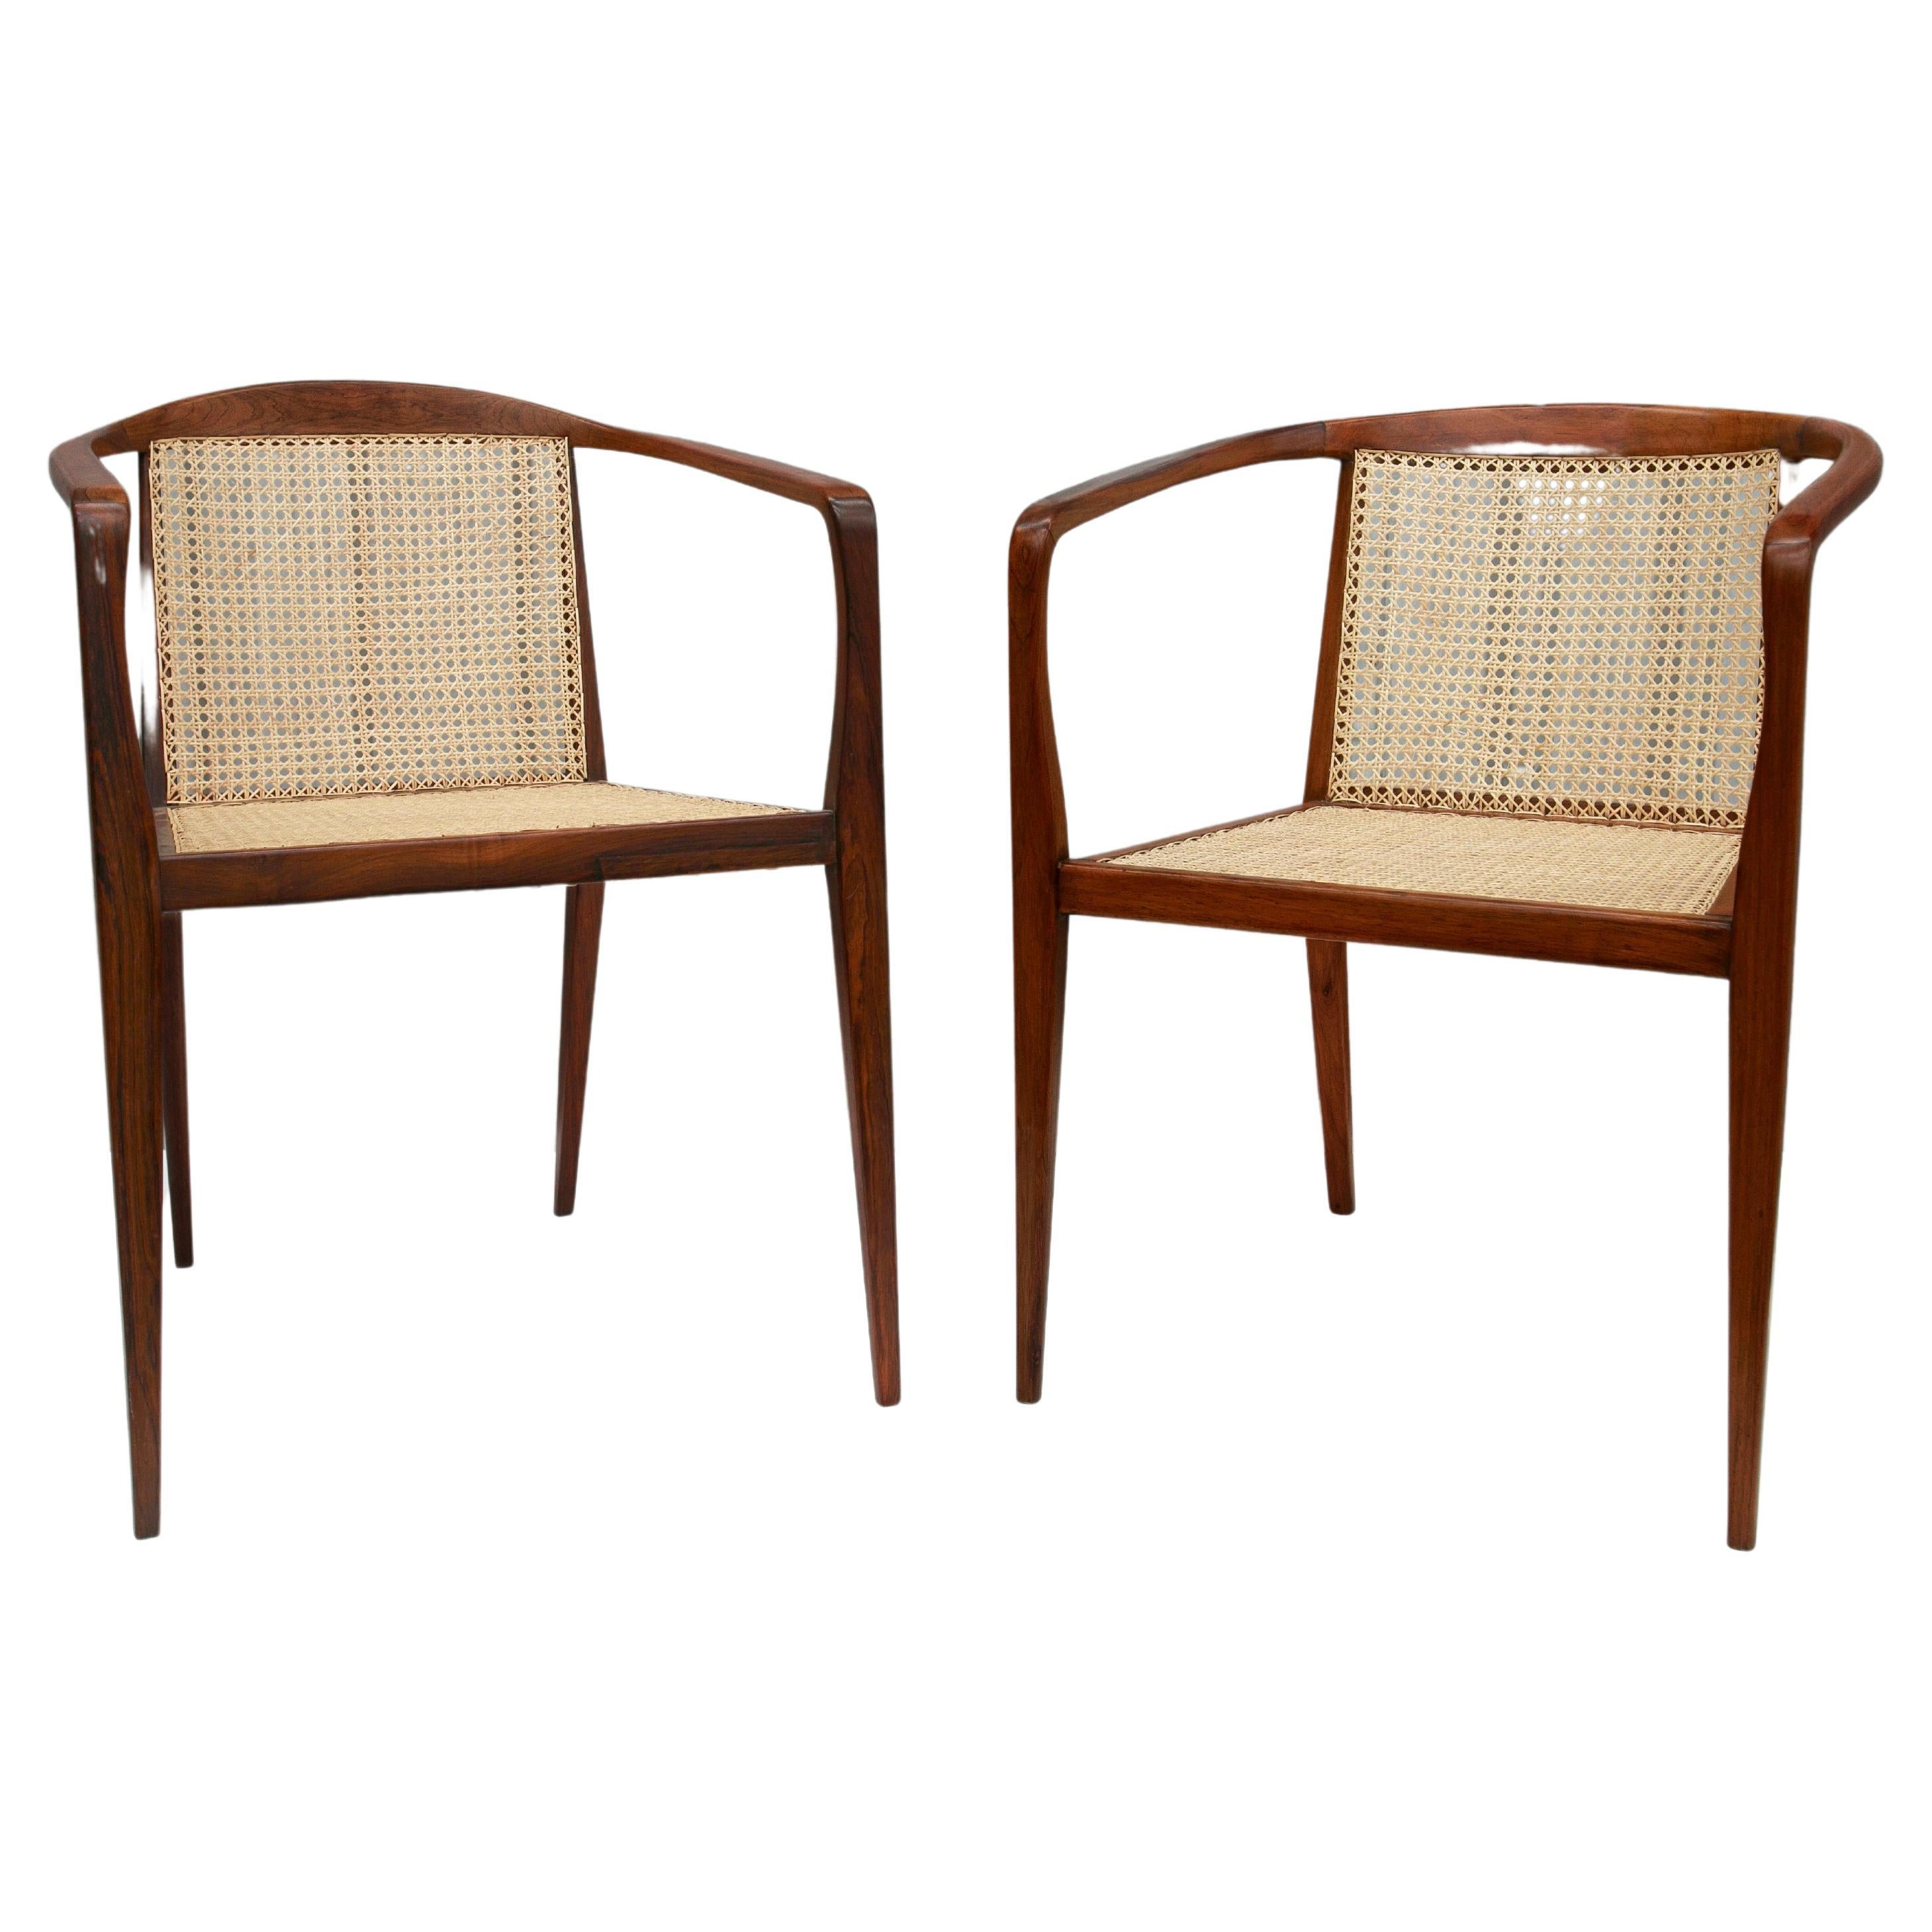 Available today, these fabulous Brazilian Modern Armchairs in Hardwood & Cane designed by John Graz in the fifties are THE FIND of the year.

The delicate set is made of Brazilian rosewood, known as Jacaranda and consists of four toothpick legs, a